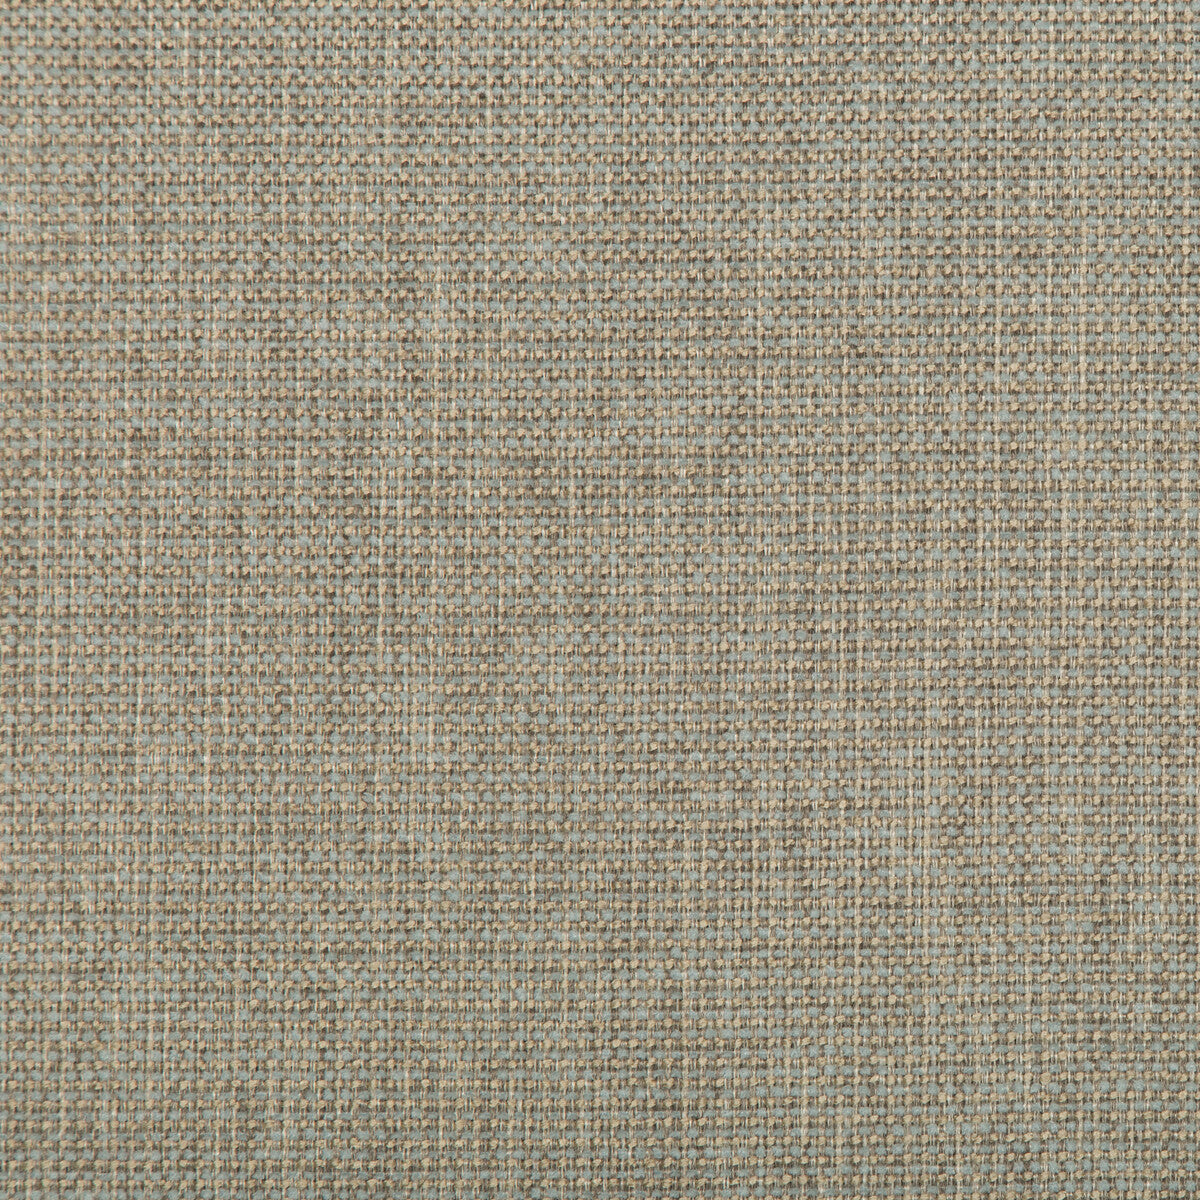 Burr fabric in haze color - pattern 35745.1511.0 - by Kravet Contract in the Value Kravetarmor collection